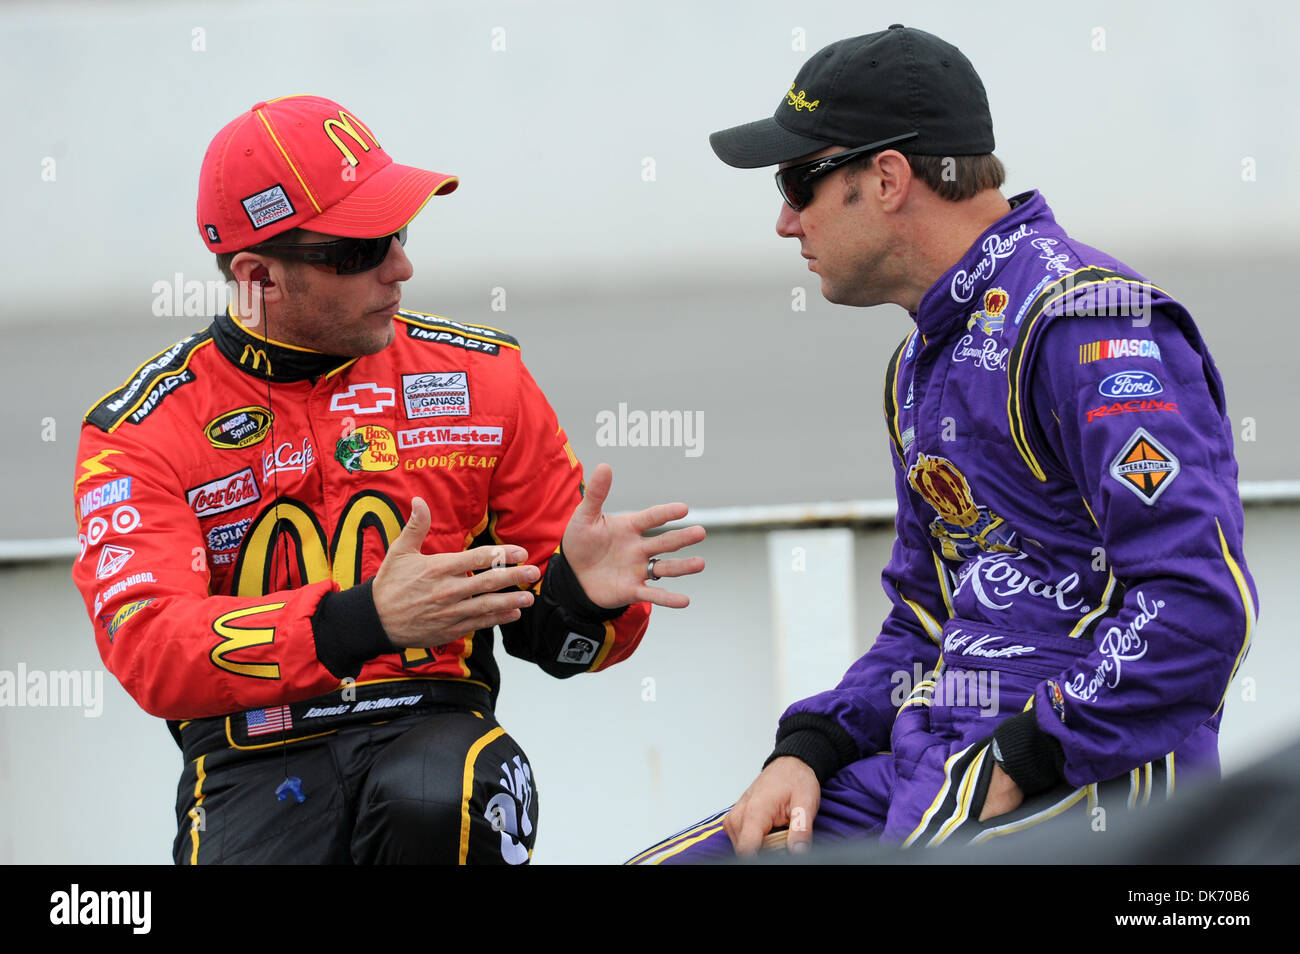 June 11, 2011 - Long Pond, Pennsylvania, United States of America - Jamie McMurray and Matt Kenseth chat before their  qualifying runs at Pocono Raceway for the 5-Hour Energy 500. (Credit Image: © Brian Freed/Southcreek Global/ZUMAPRESS.com) Stock Photo